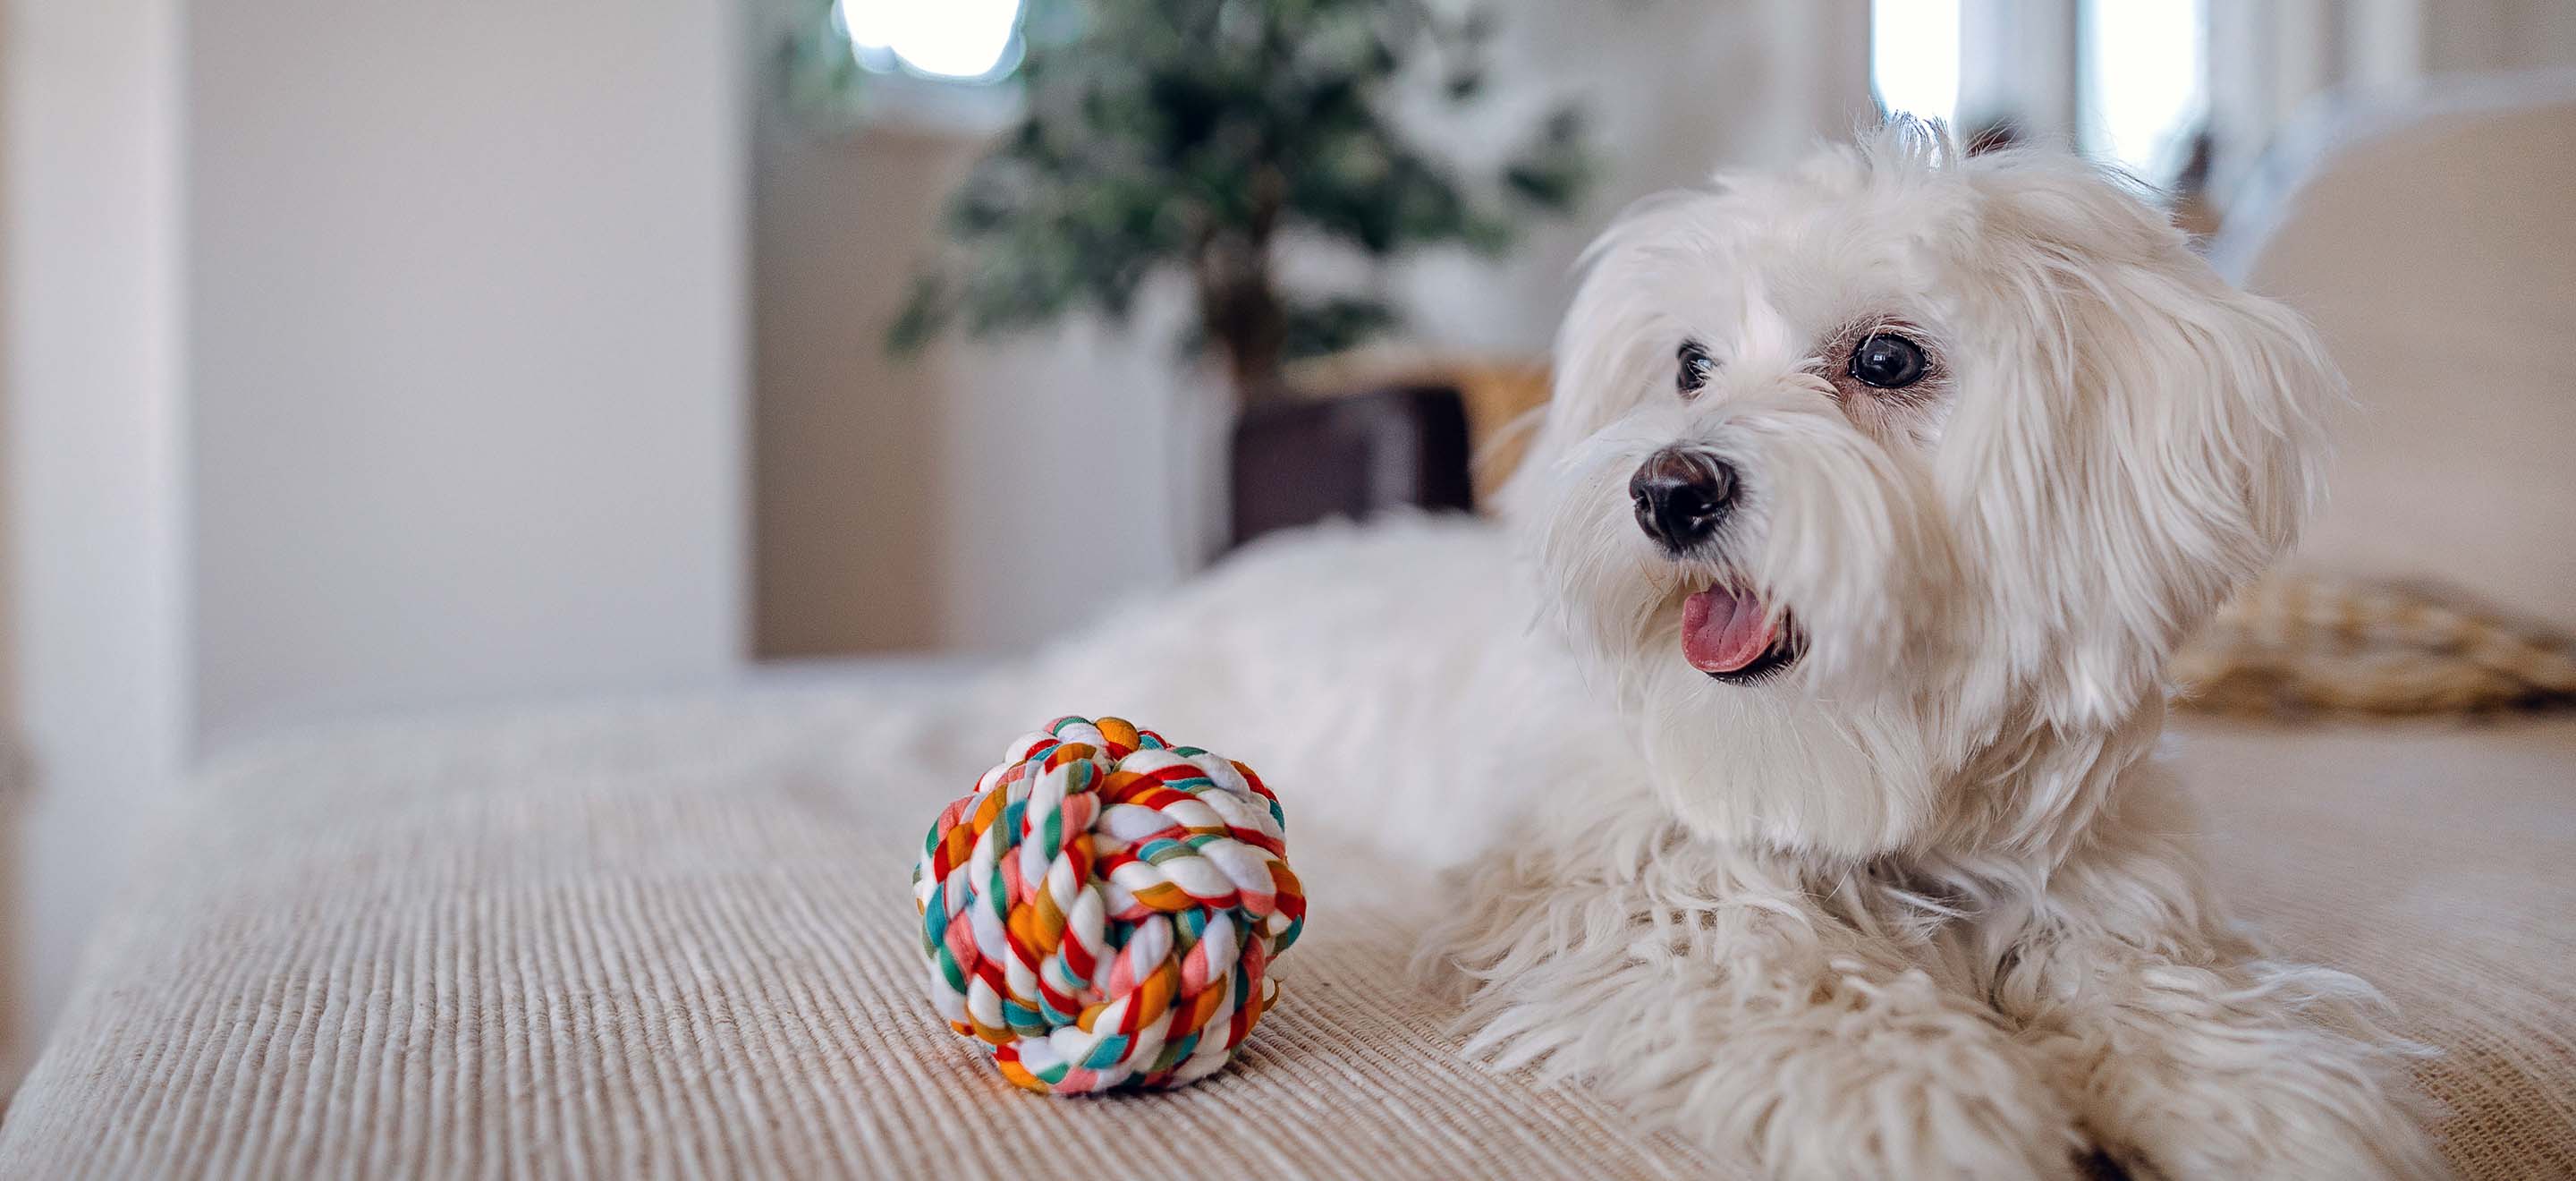 White Maltese dog laying on a beige bed next to a rainbow colored rope knot dog toy image